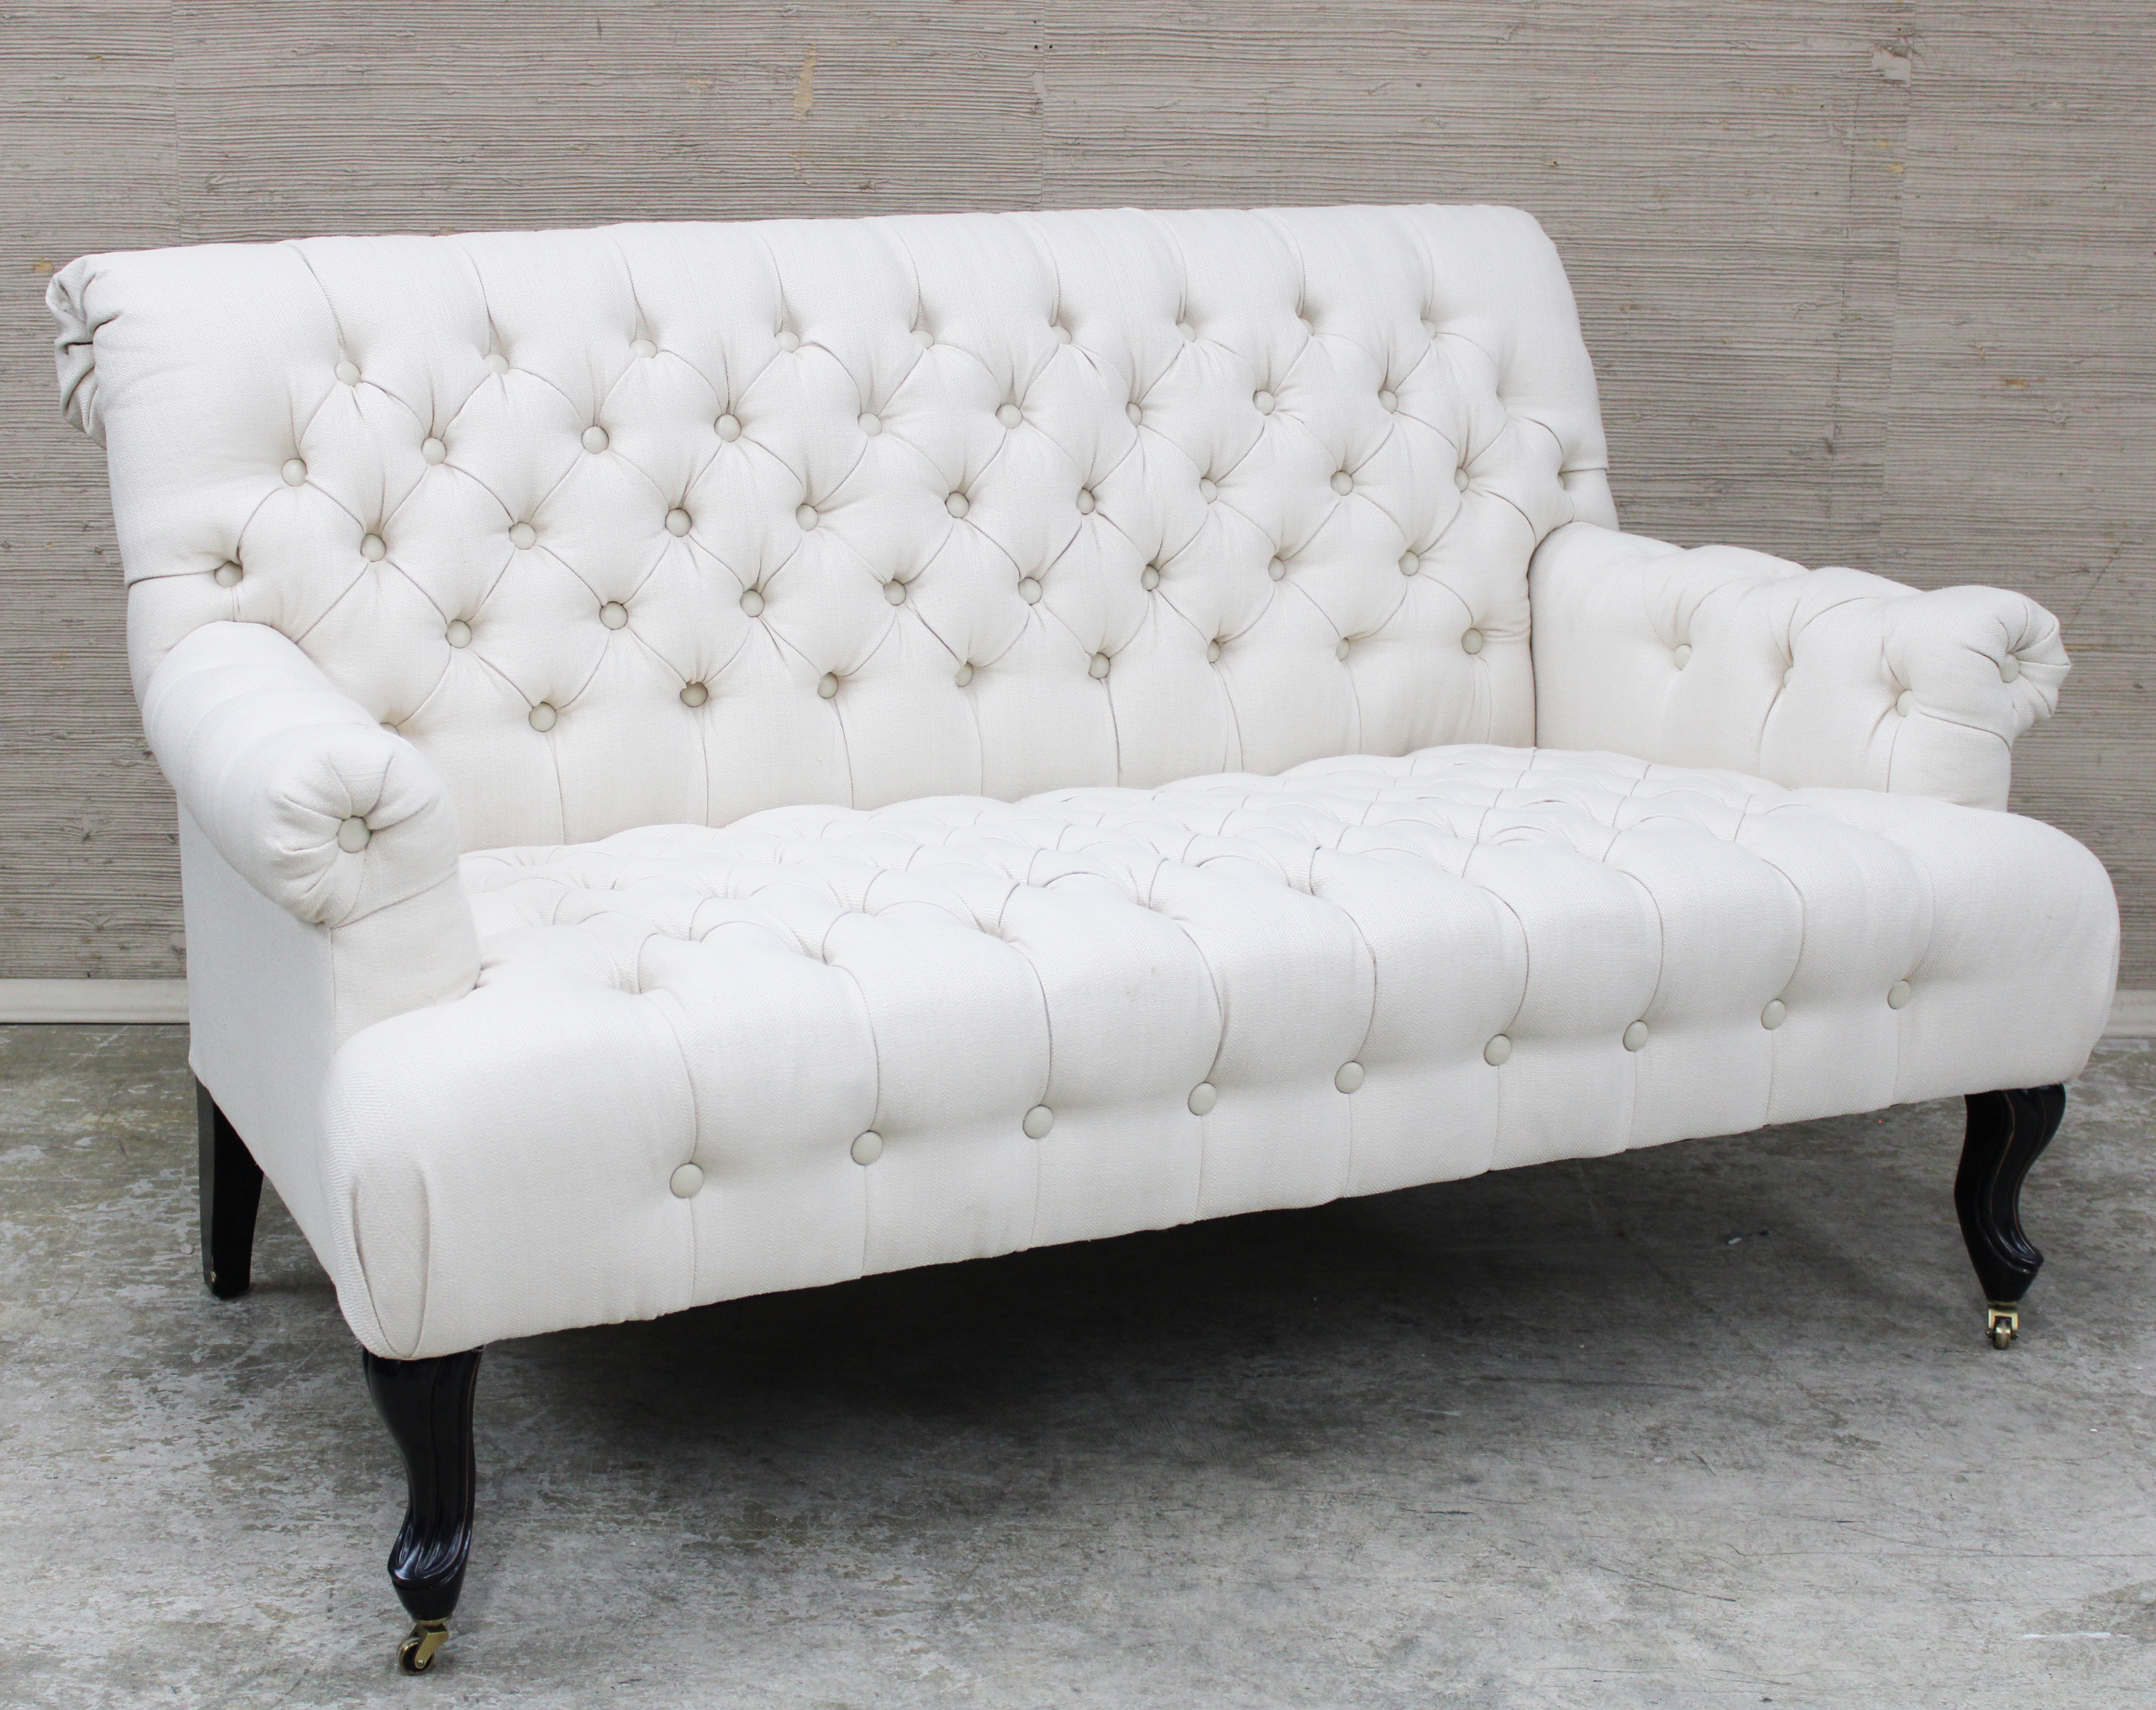 ROLL OVER BACK SETTEE Tufted upholstered 2c89f4